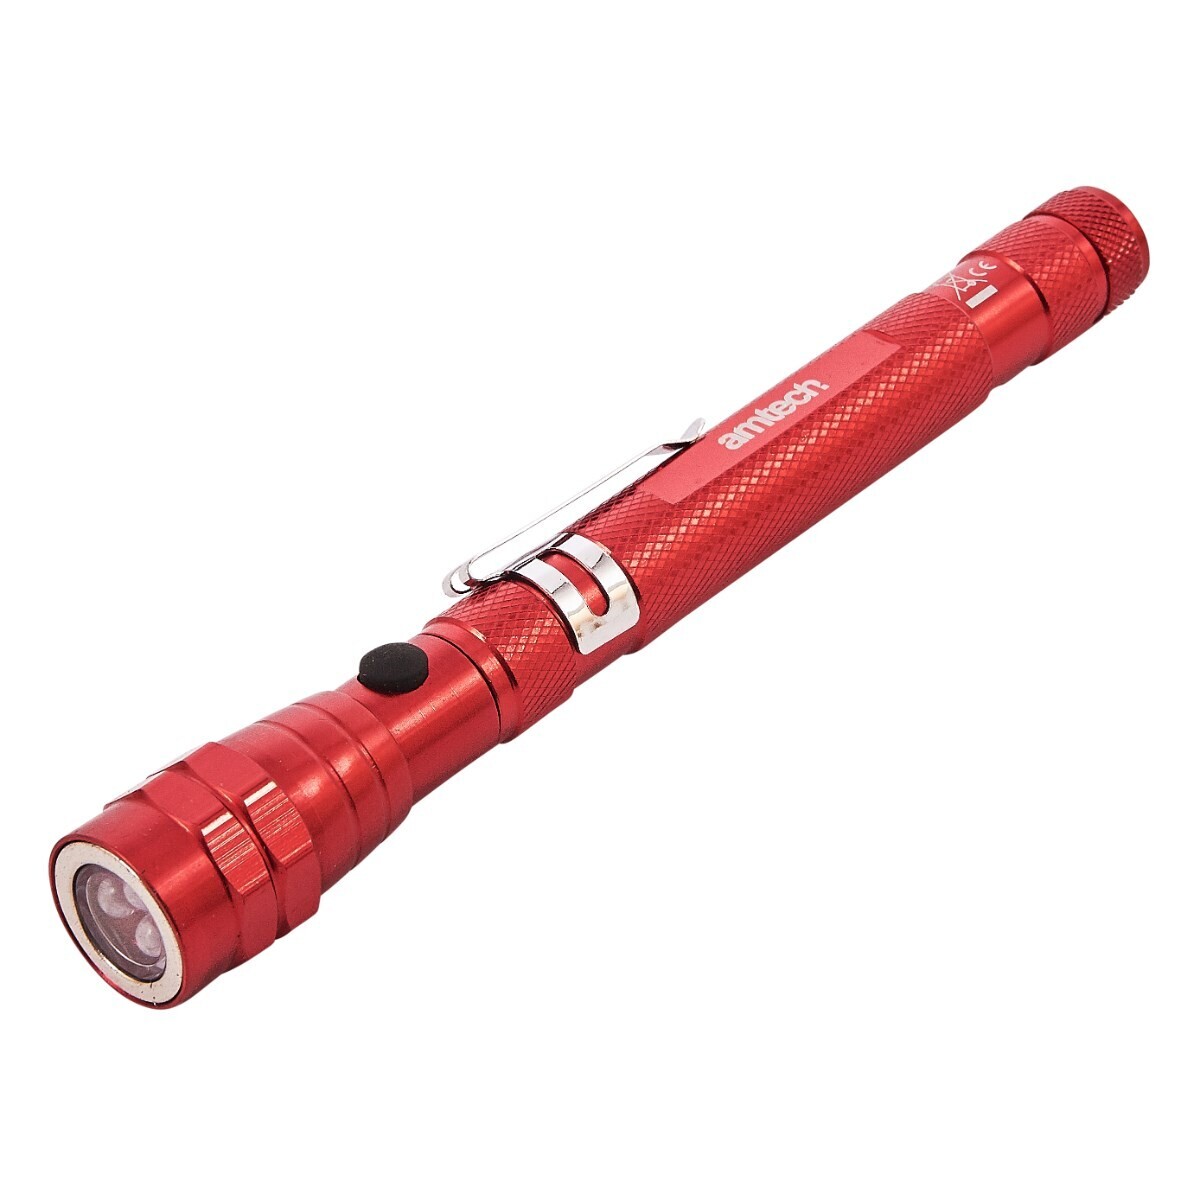 3 LED telescopic torch & magnetic pick up tool